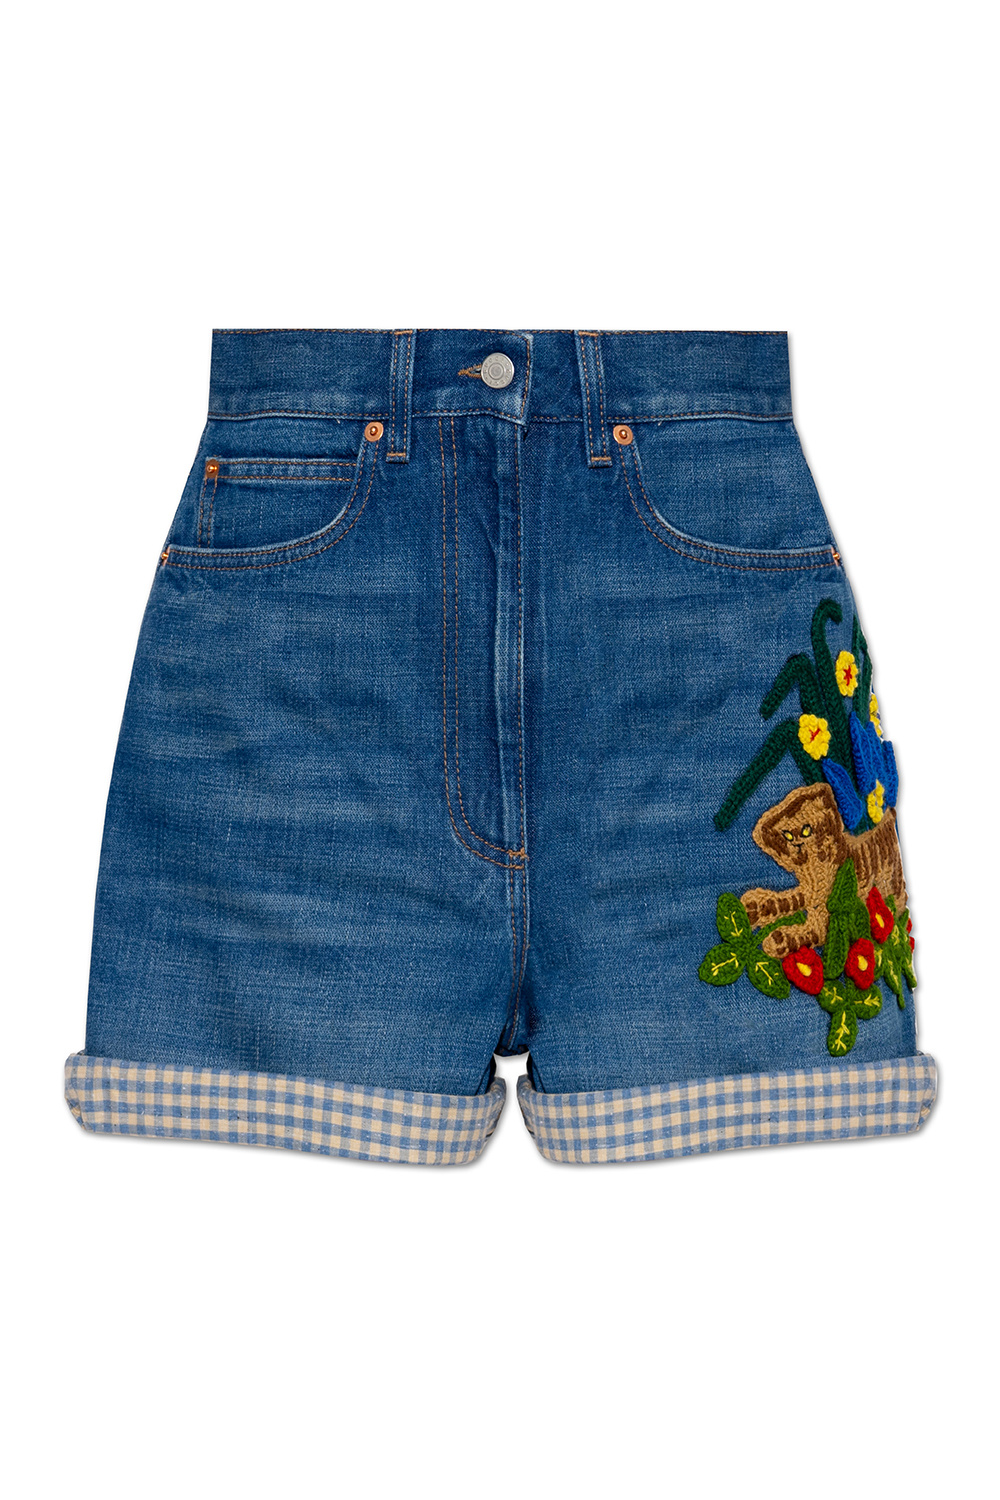 Gucci Denim shorts from the ‘Gucci Tiger’ collection